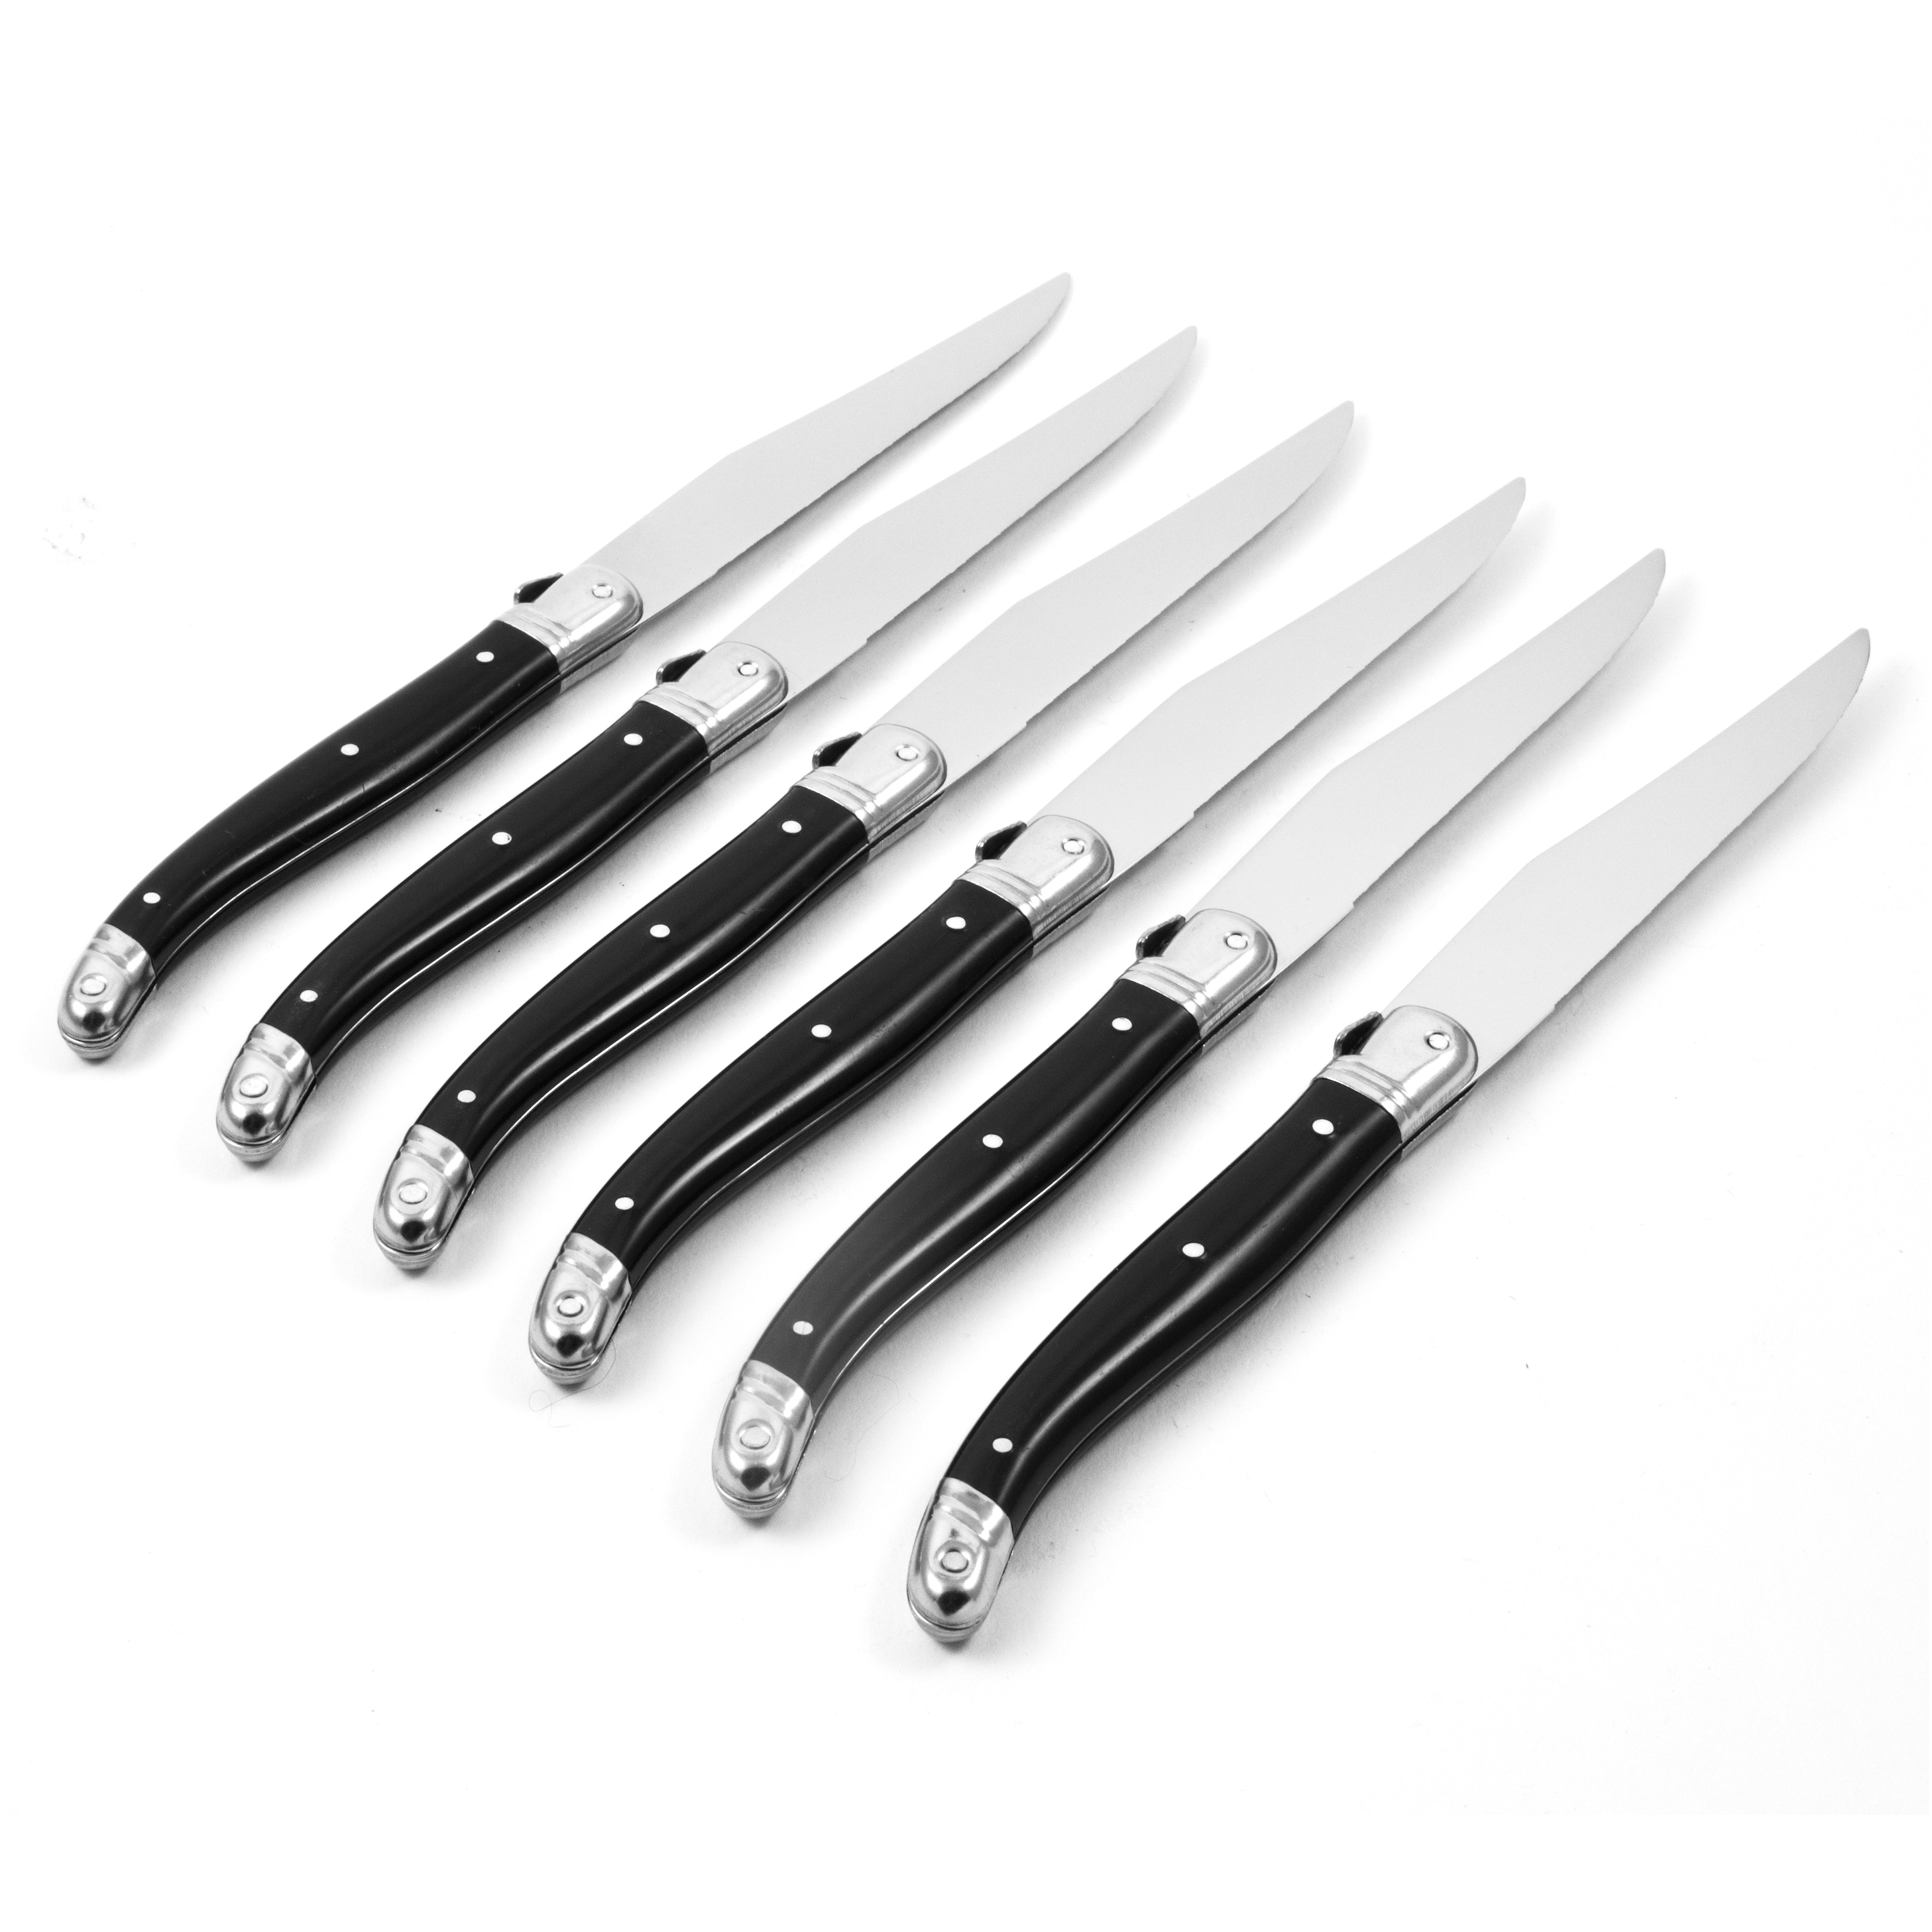 Laguiole Black Platine Knives in Wooden Box with Acrylic Lid (Set of 6) Cutlery Laguiole Brand_Laguiole Kitchen_Dinnerware Kitchen_Kitchenware Knife Sets Laguiole Spring Collection Laguiole_Knives_S_6_-_Black_out_of_box_fa1041c5-a6c5-4776-b19f-dfe64093efc2